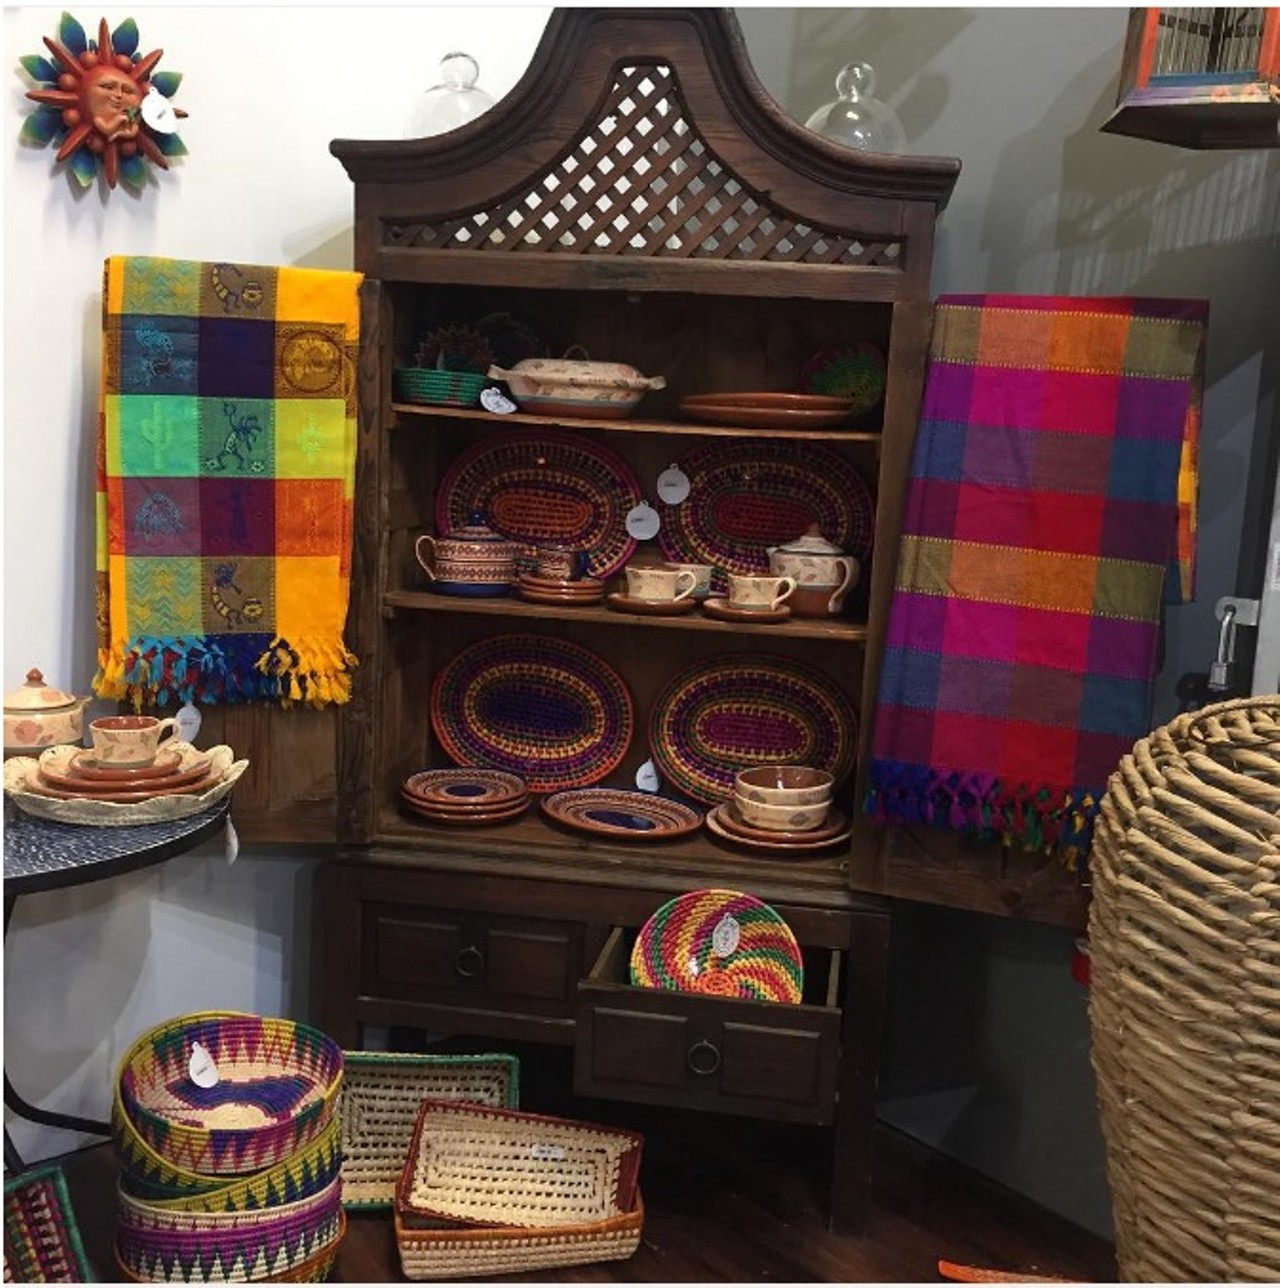 Nuestra Manos
This eclectic boutique brings cultural art and decor from across the Rio Grande to Central Florida.
Follow on: Facebook, Instagram, Twitter
Photo via Artegon Marketplace website